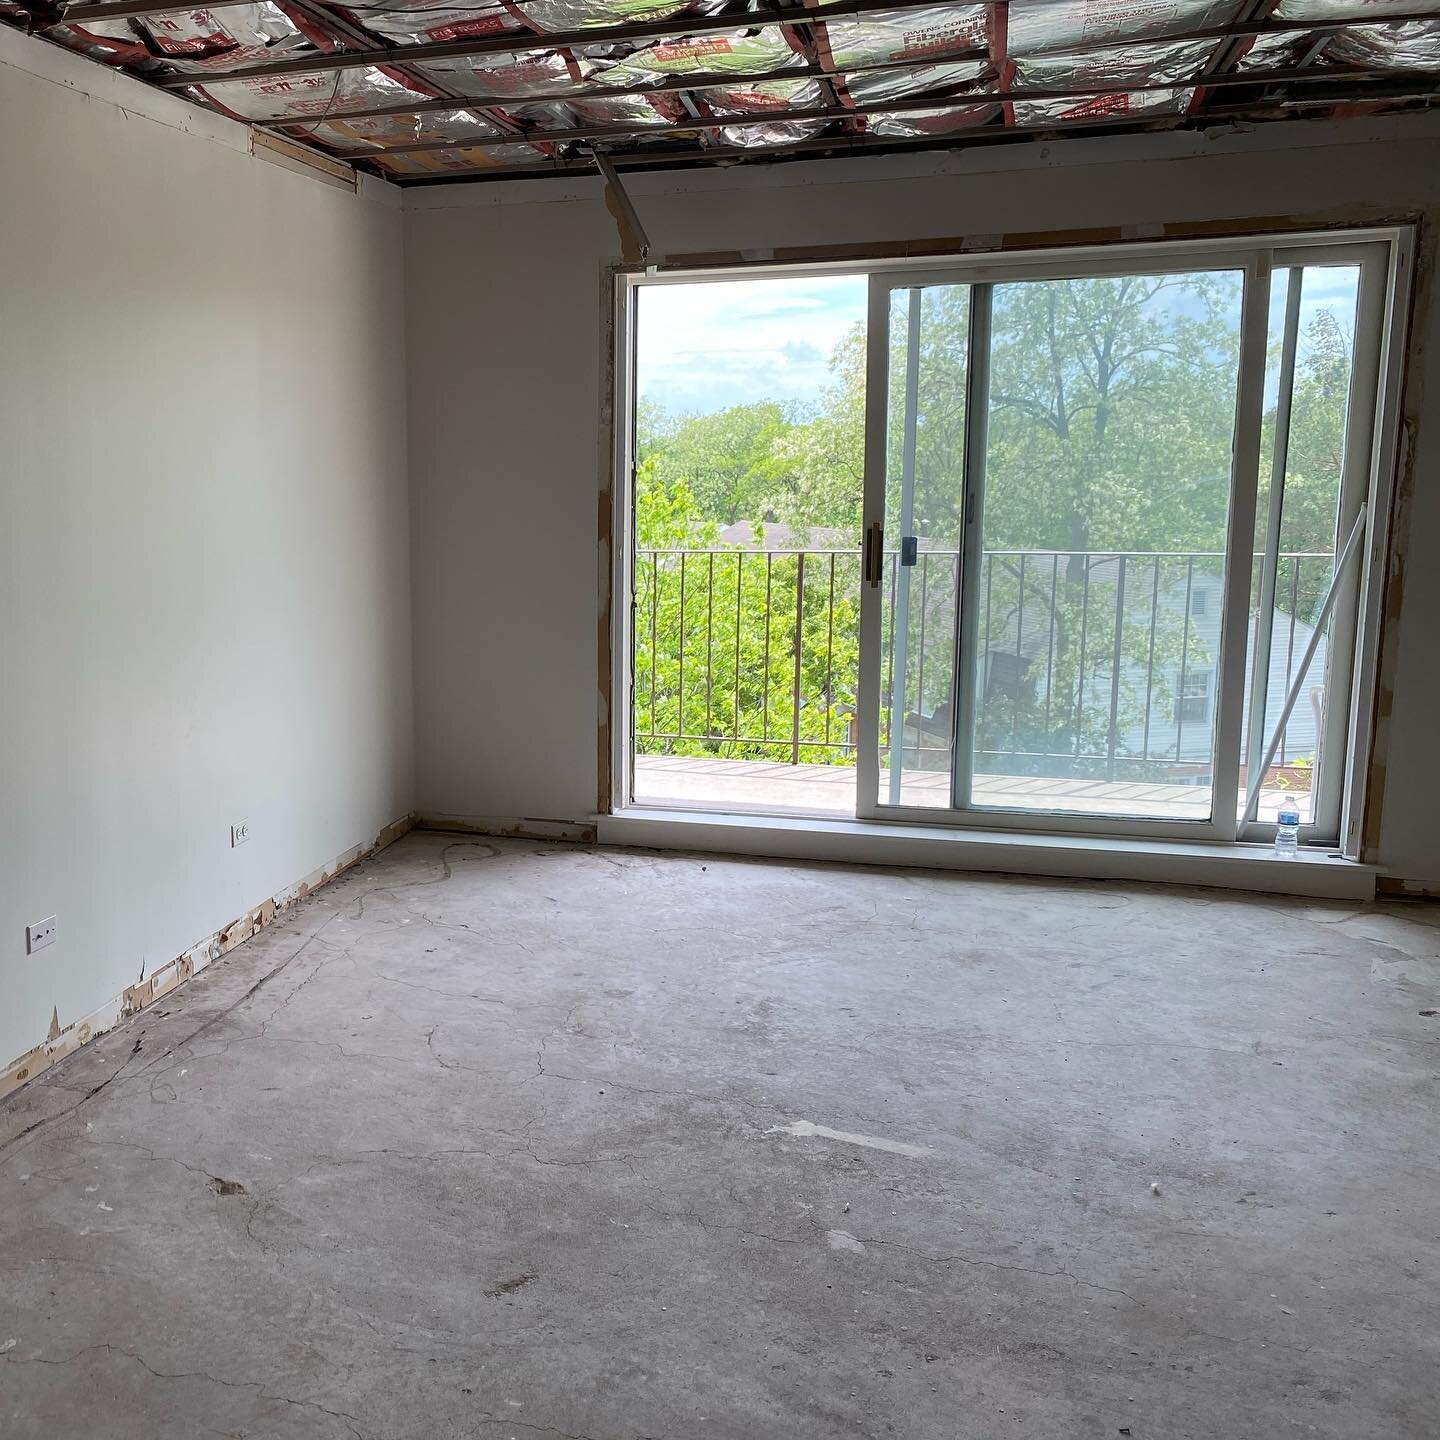 Gutted and ready to go. My favorite project to work on. I get a clean slate to work with. #winnetkagutrehab #noryhshoreinteriordesign #movingwalls #raisingceilings #layingfloors #rehabproject  #downtothestuds #mcoheninteriordesign